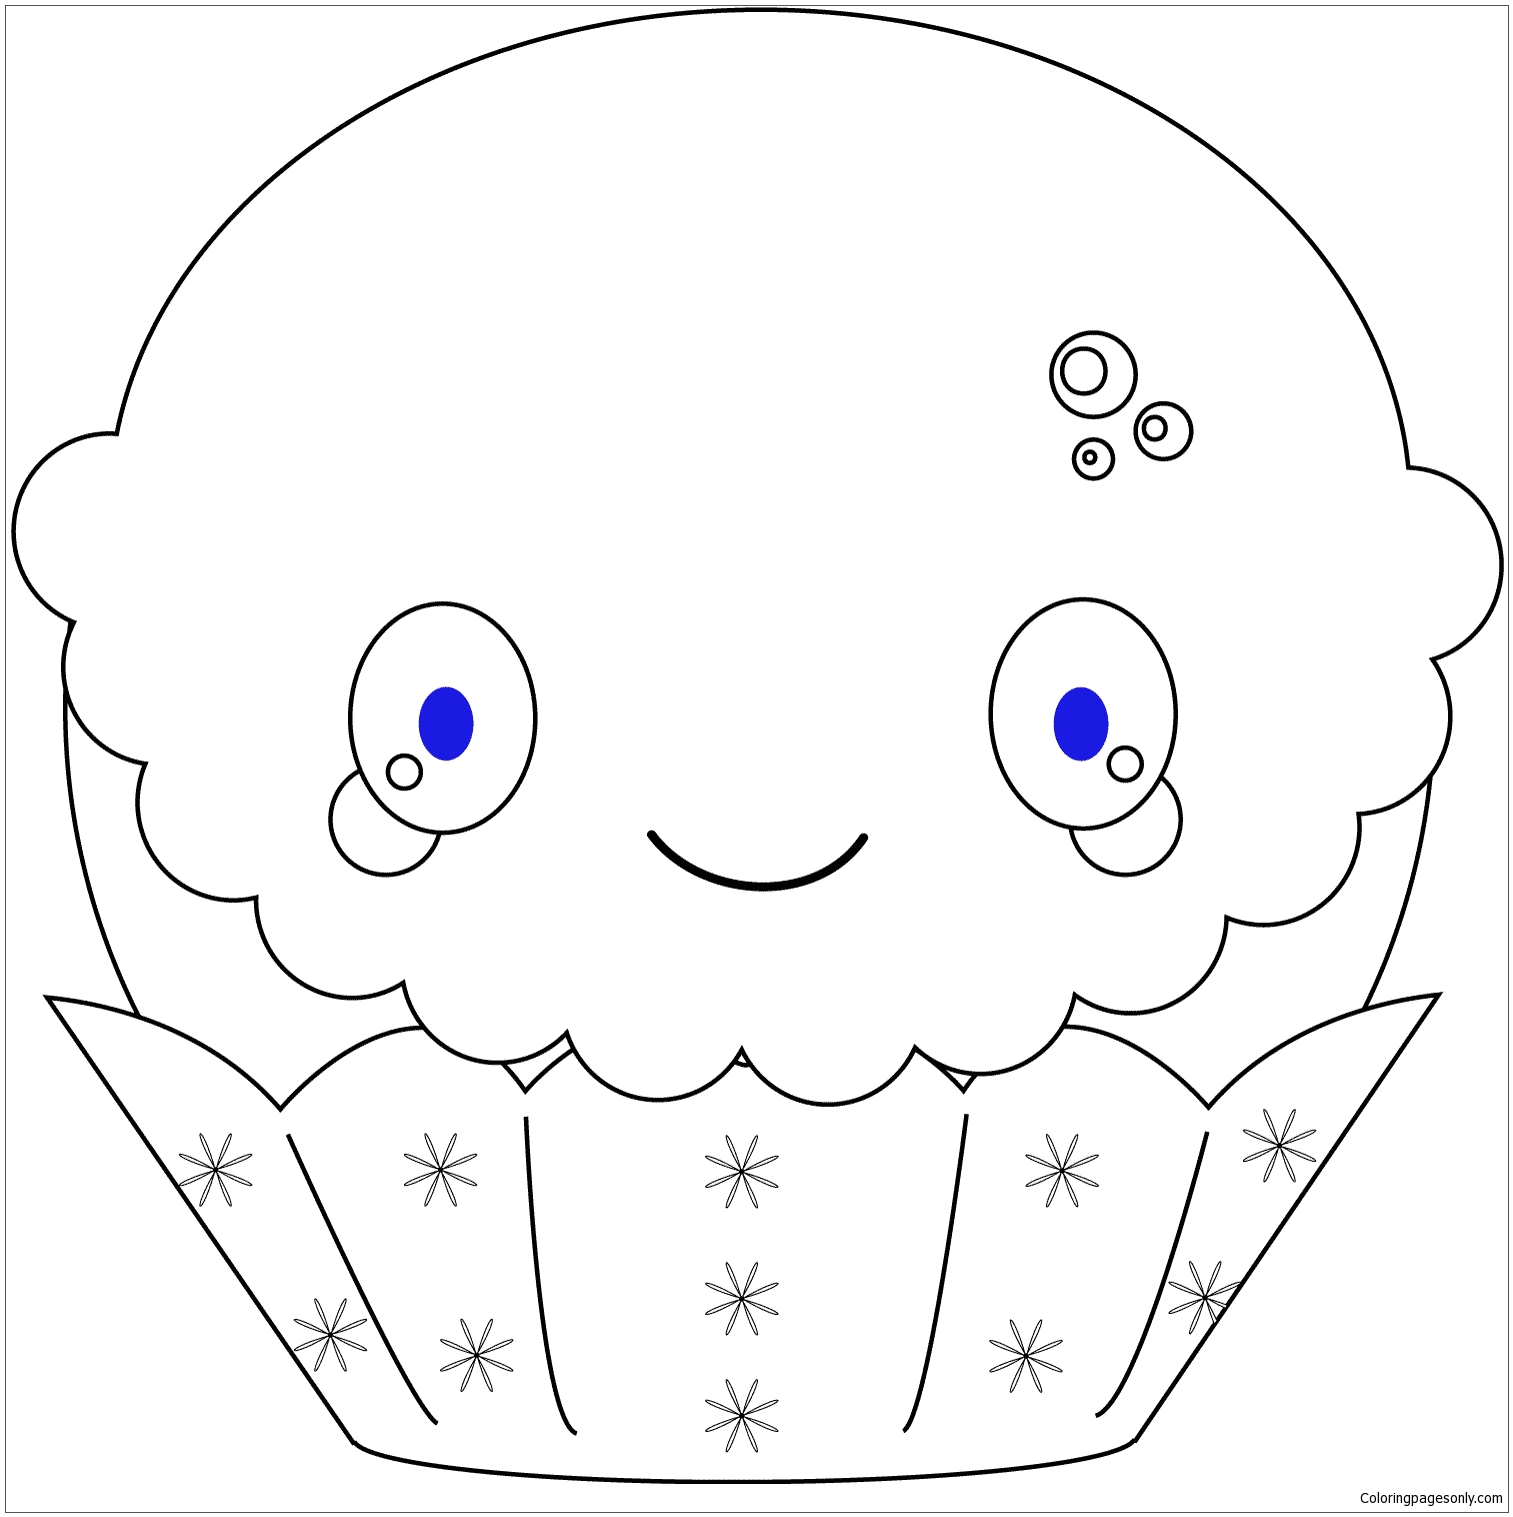 Kawaii Christmas Cupcake Coloring Pages - Desserts Coloring Pages